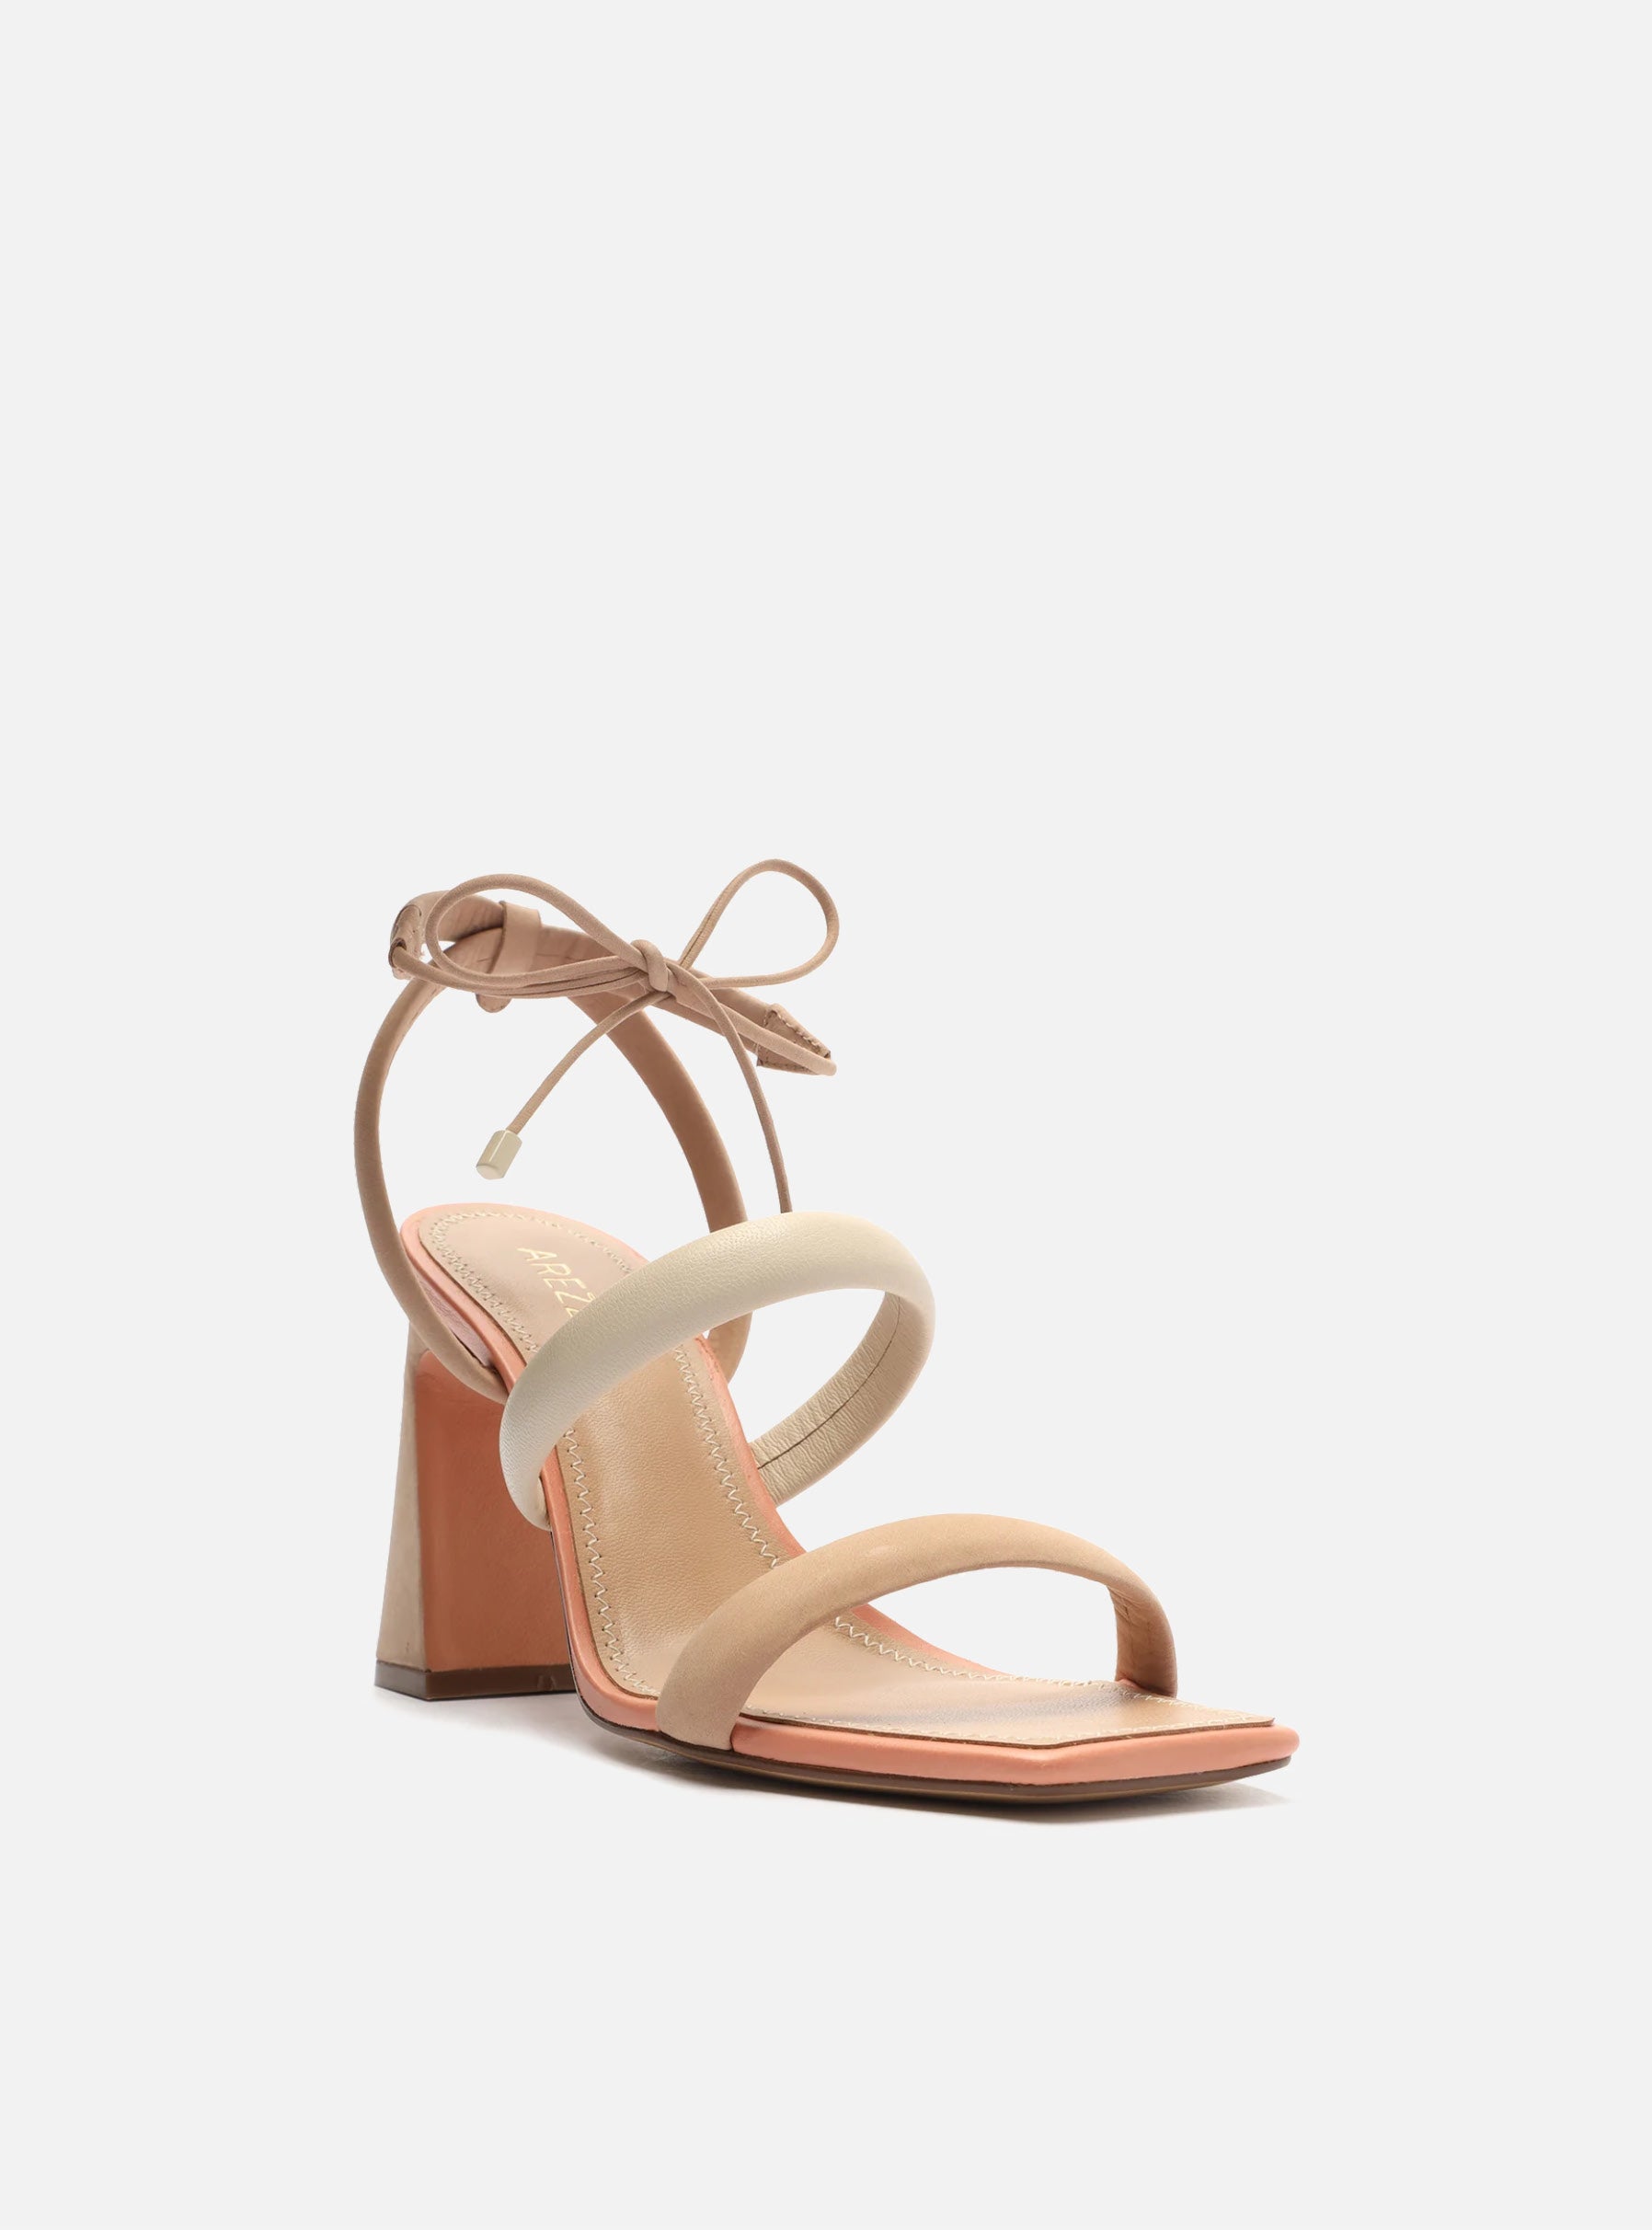 Beige Synthetic Leather Lenny High Block Sandal Front Side View